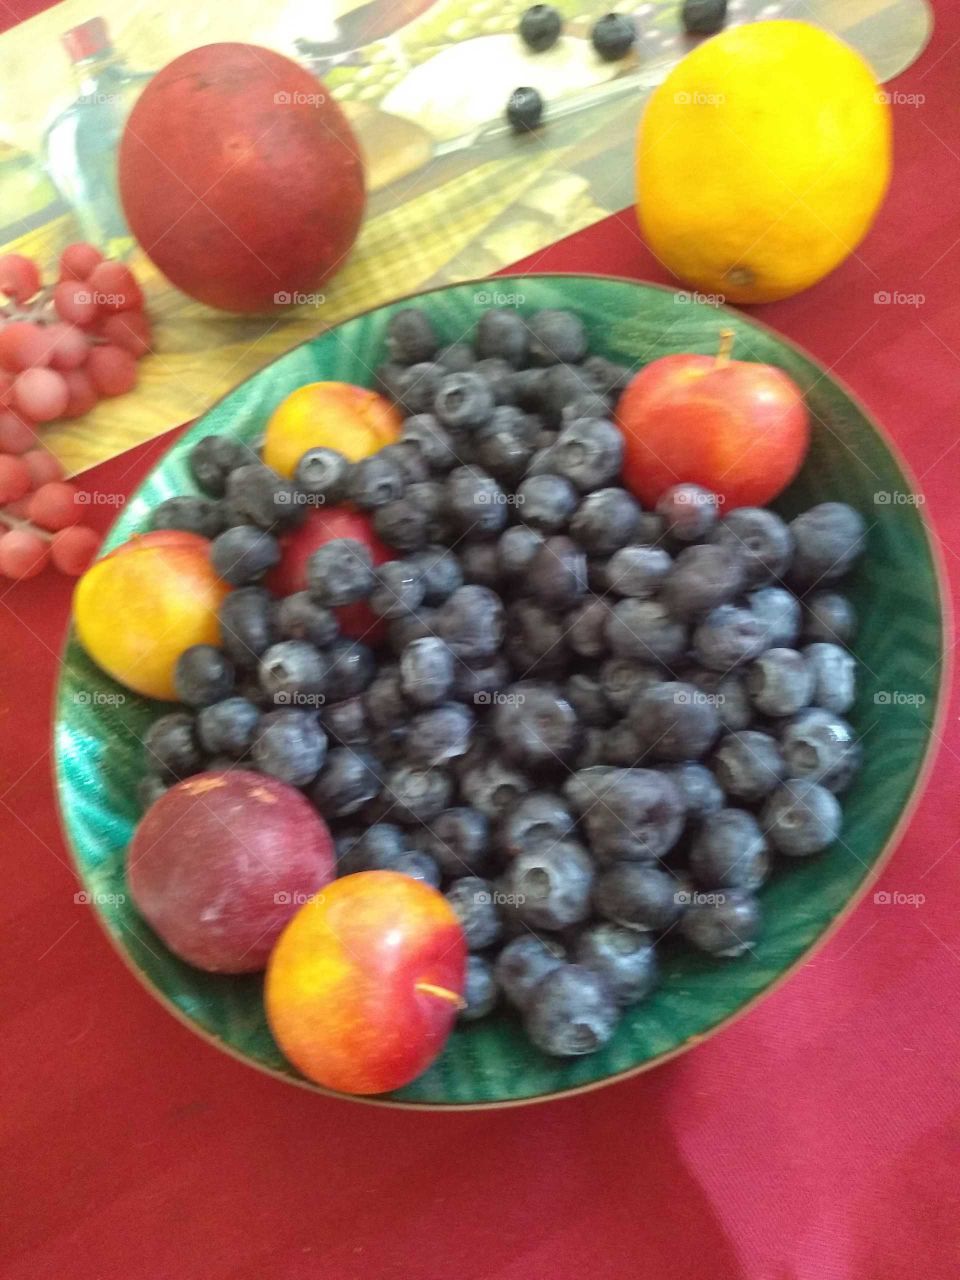 and this picture is blueberries good baby peaches and lemon also a pomegranate taking on my dining table and as you can see I like working with bright colors